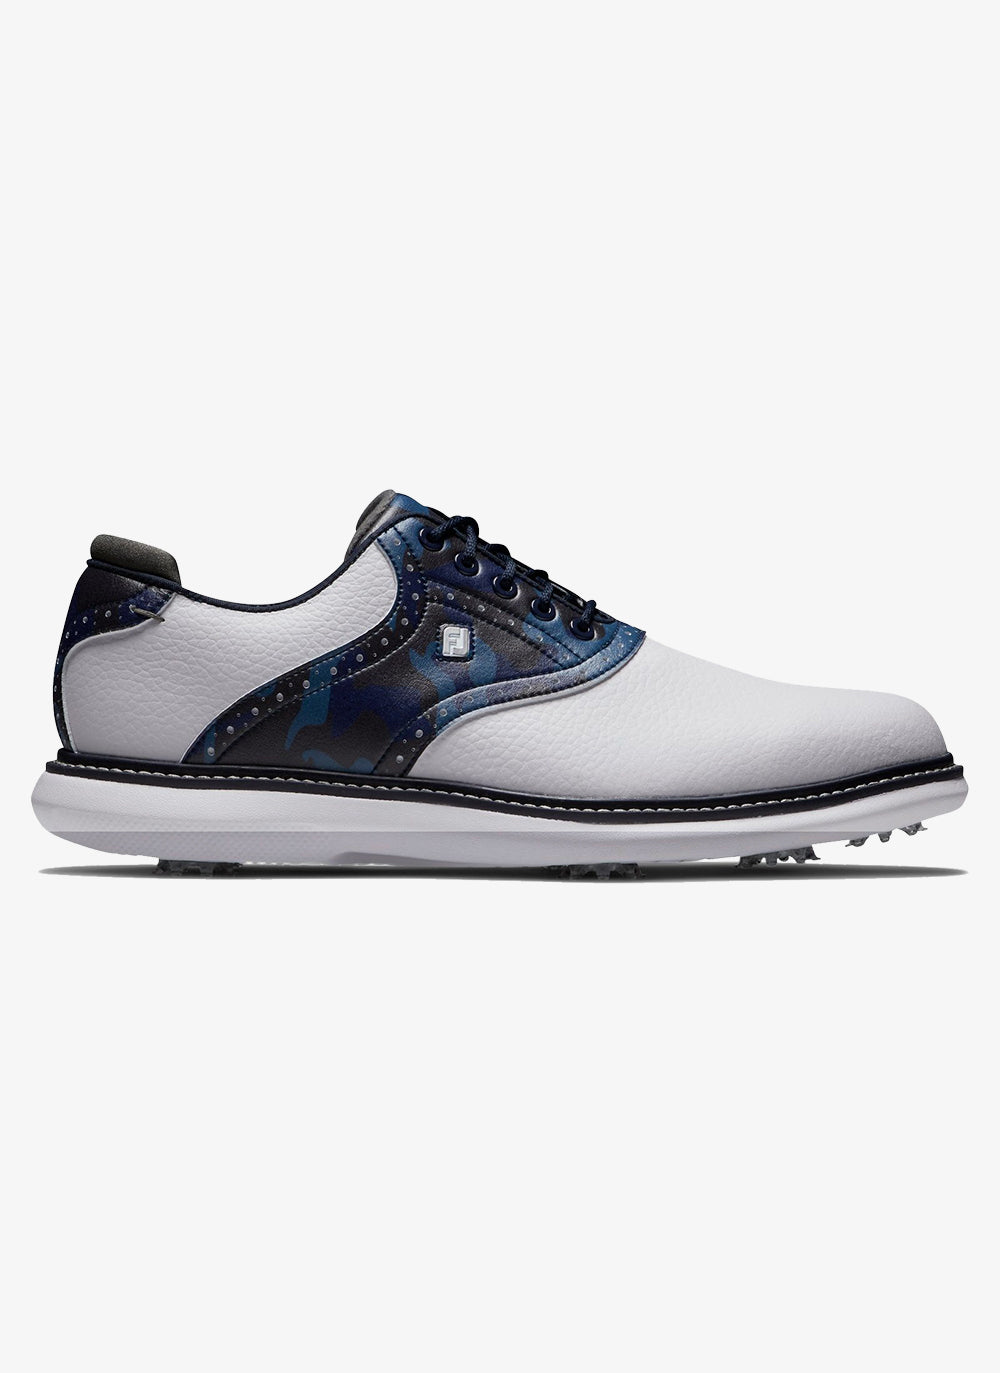 FootJoy Traditions Golf Shoes 57945